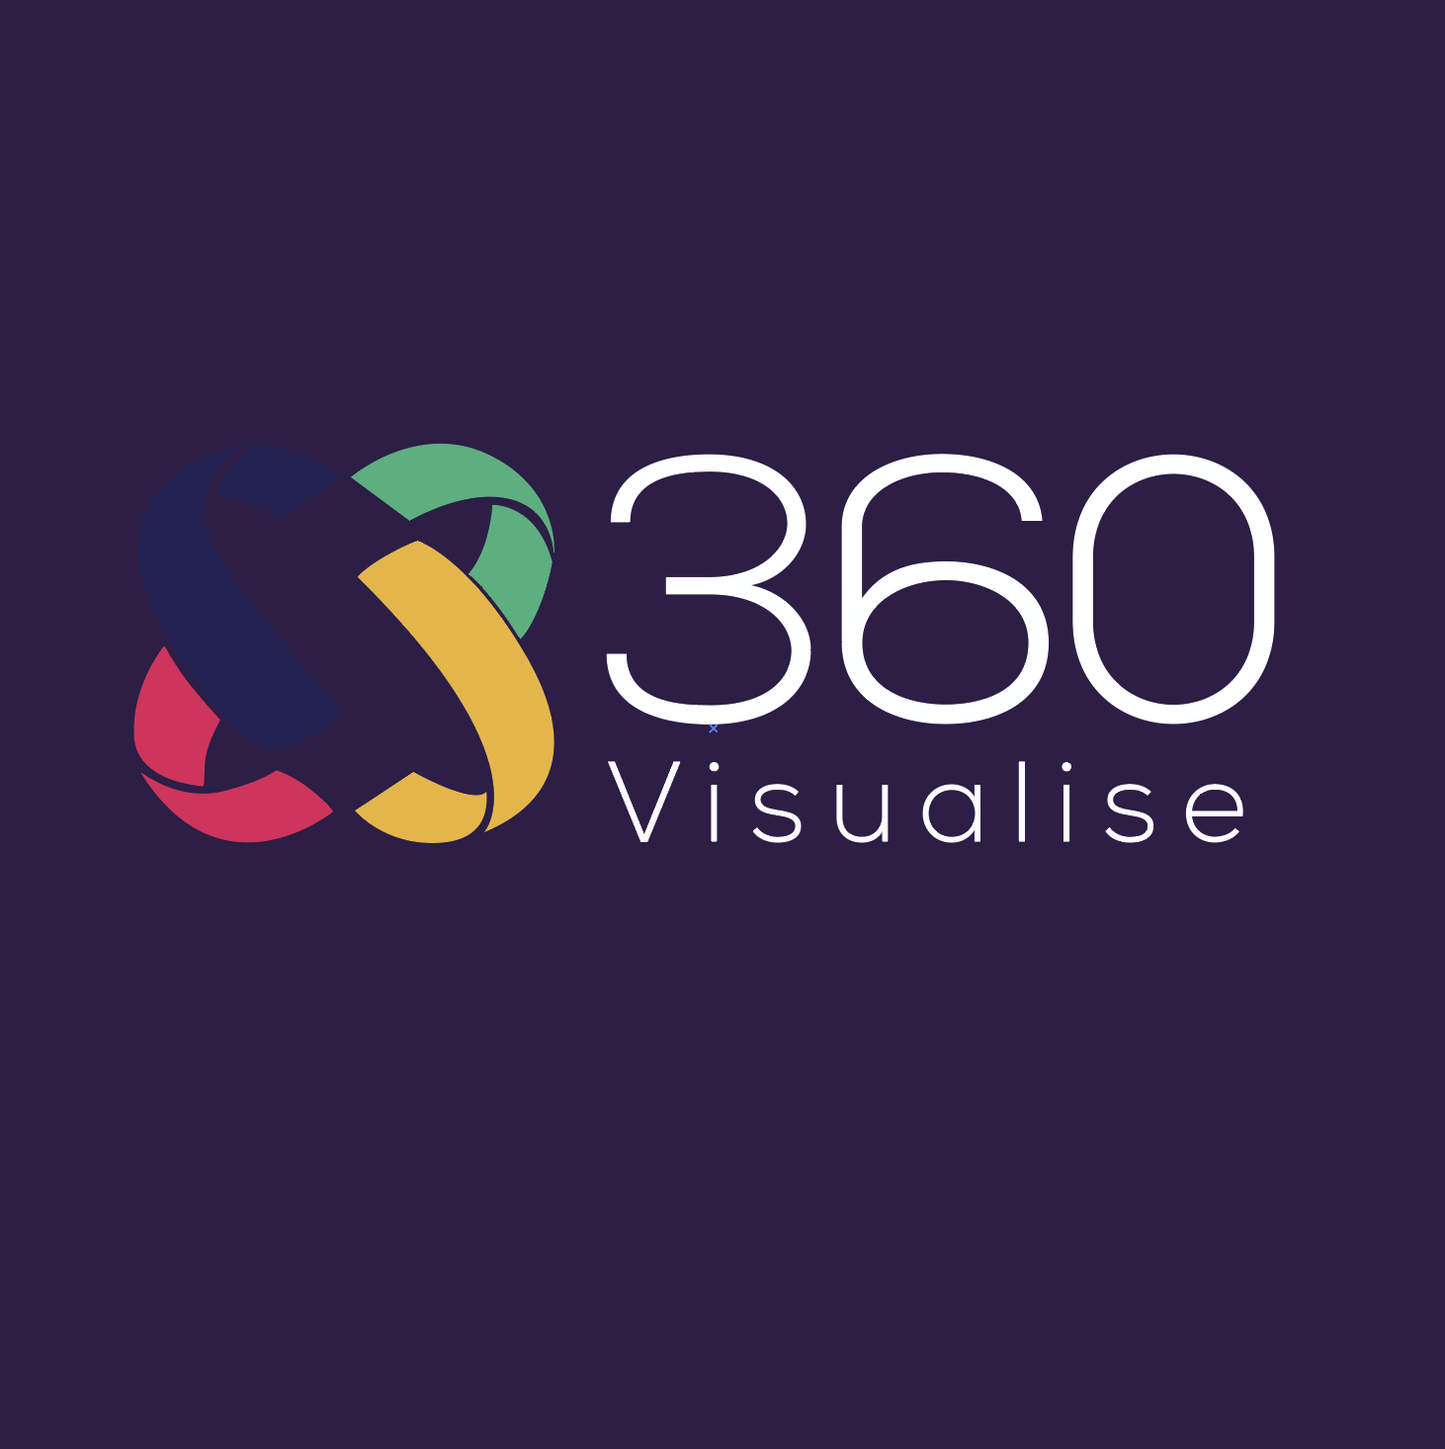 Why Choose 360 Visualise as your CBCT Partner? - 360visualise